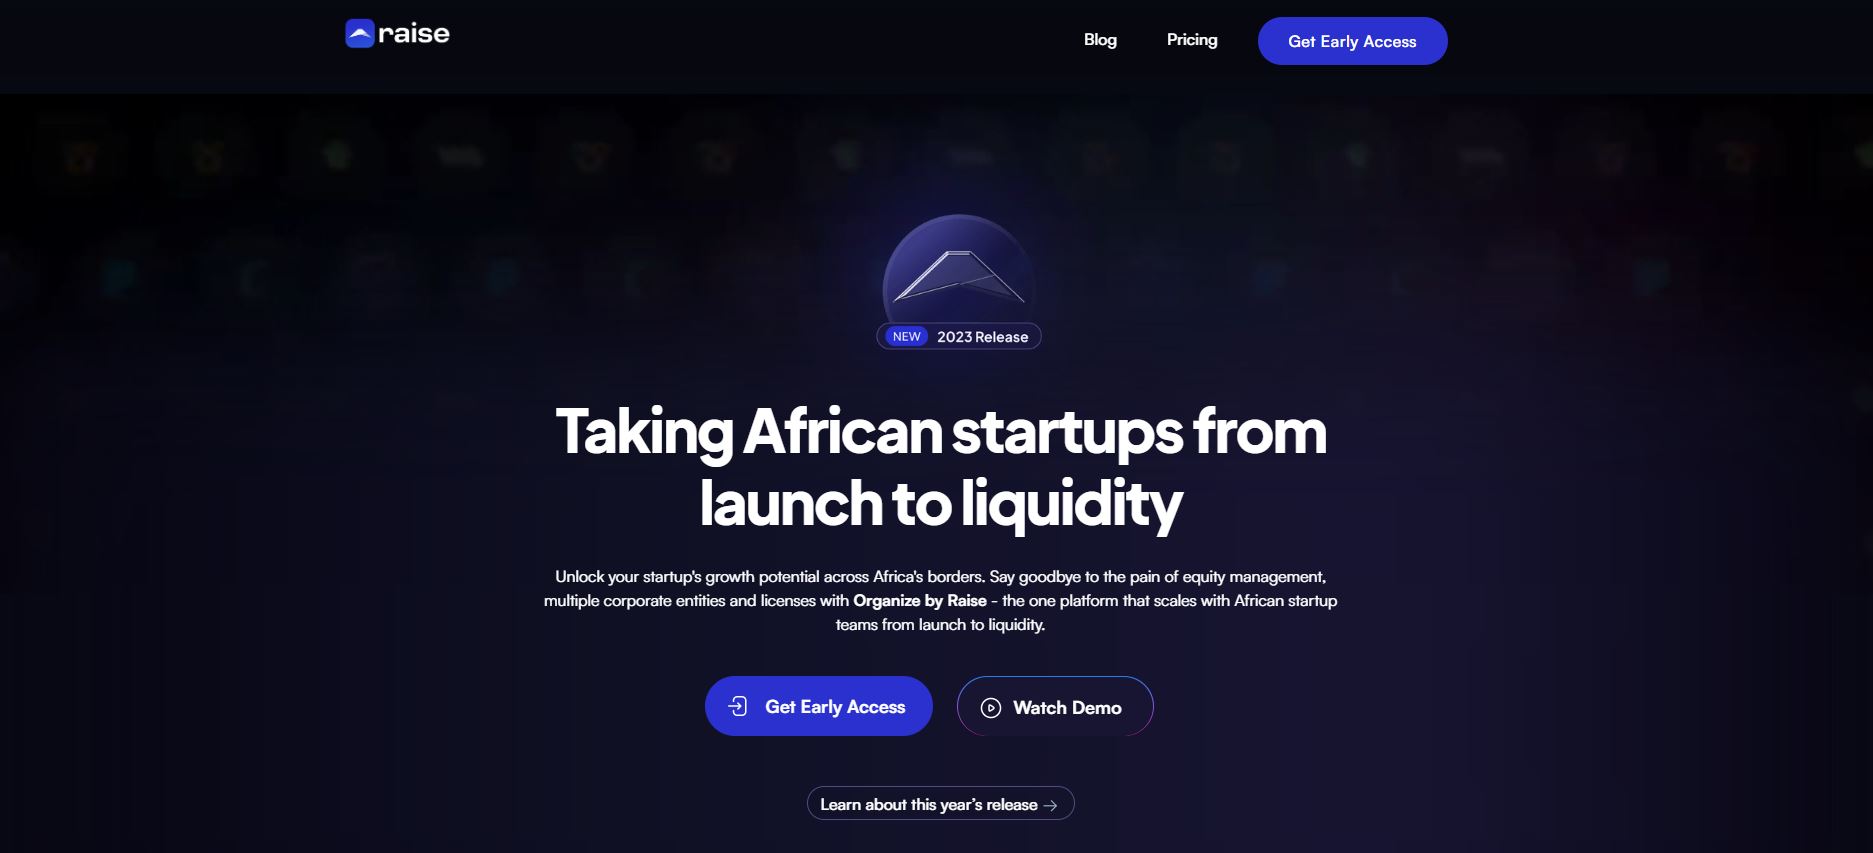 Raise is the go-to tool for startups looking to unlock their growth potential across Africa’s borders